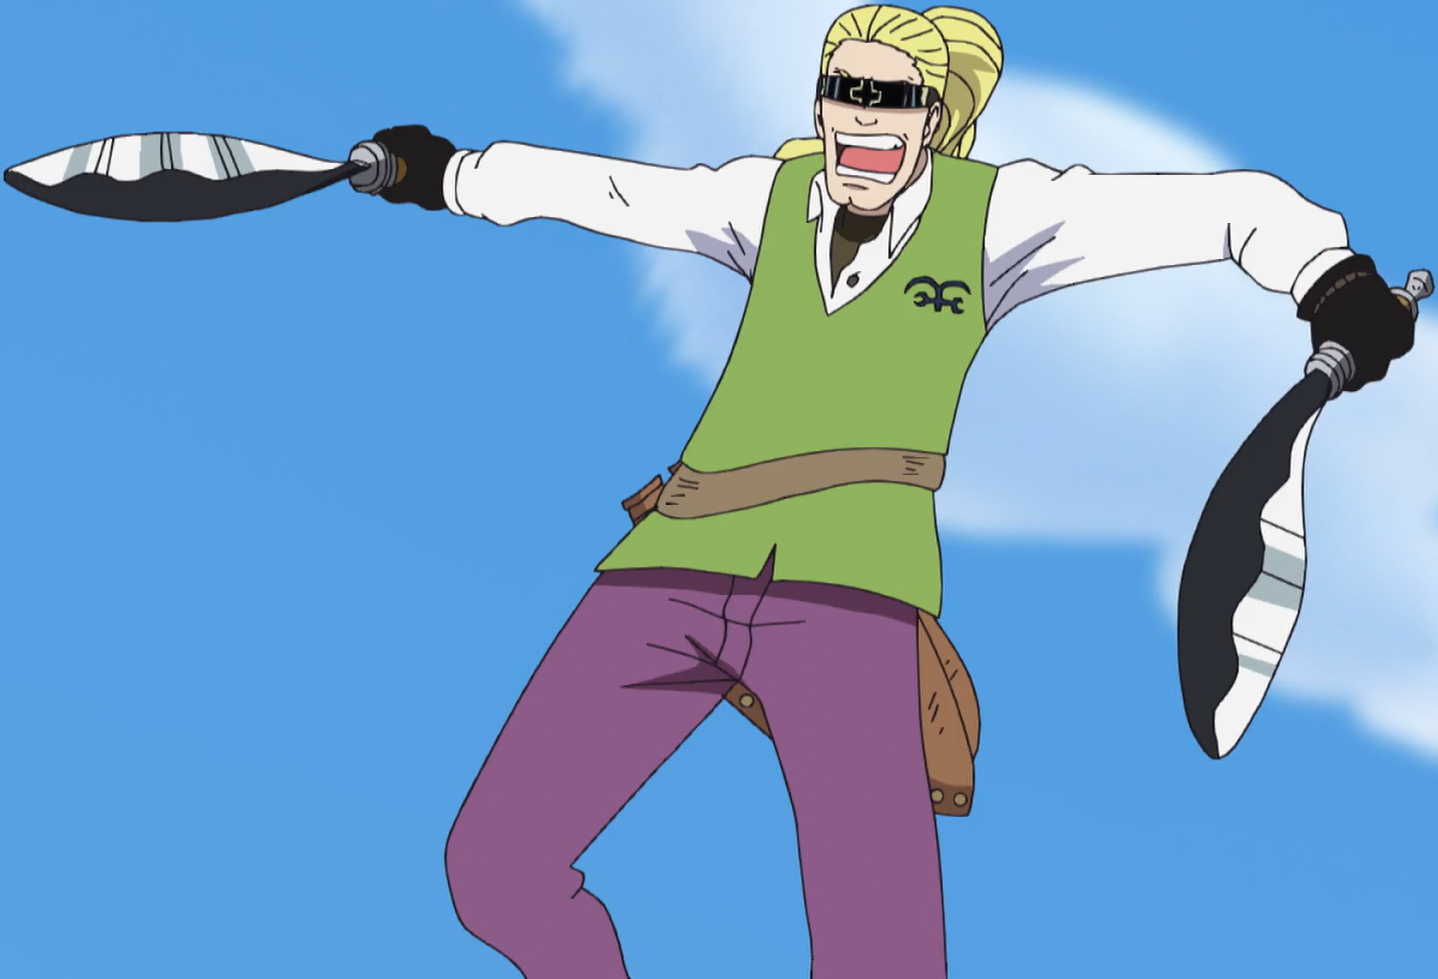 http://static1.wikia.nocookie.net/__cb20130523021609/onepiece/images/9/95/Helmeppo%27s_Kukri.png